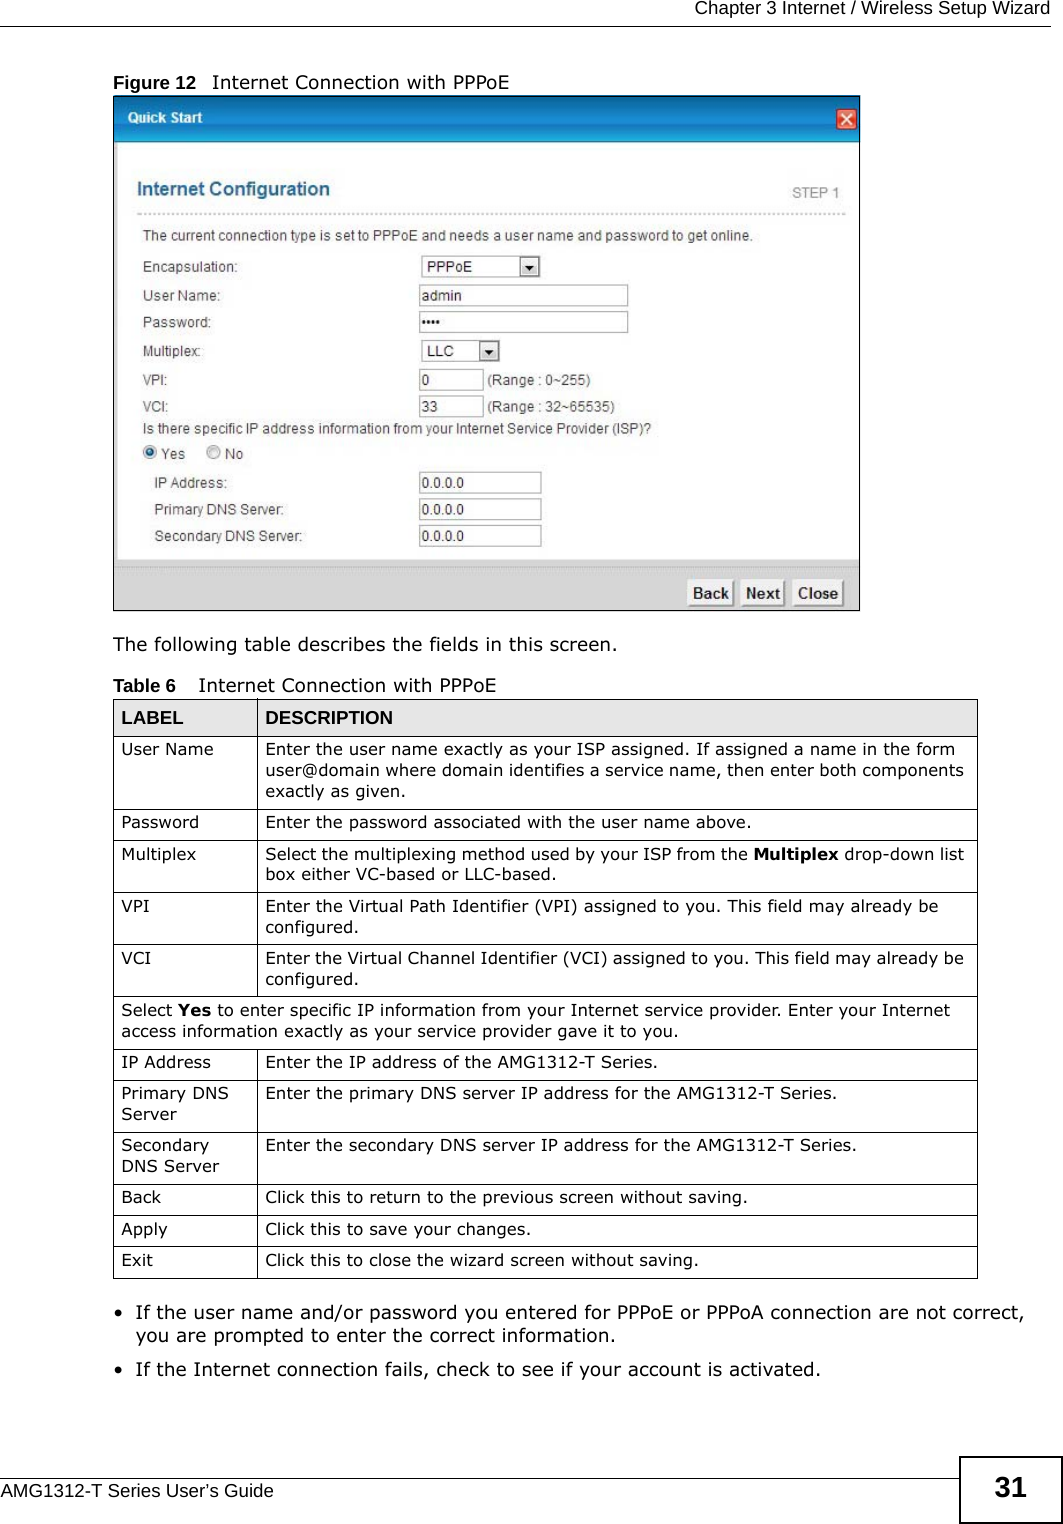  Chapter 3 Internet / Wireless Setup WizardAMG1312-T Series User’s Guide 31Figure 12   Internet Connection with PPPoEThe following table describes the fields in this screen.• If the user name and/or password you entered for PPPoE or PPPoA connection are not correct, you are prompted to enter the correct information.• If the Internet connection fails, check to see if your account is activated. Table 6    Internet Connection with PPPoELABEL DESCRIPTIONUser Name Enter the user name exactly as your ISP assigned. If assigned a name in the form user@domain where domain identifies a service name, then enter both components exactly as given.Password Enter the password associated with the user name above.Multiplex Select the multiplexing method used by your ISP from the Multiplex drop-down list box either VC-based or LLC-based. VPI Enter the Virtual Path Identifier (VPI) assigned to you. This field may already be configured.VCI Enter the Virtual Channel Identifier (VCI) assigned to you. This field may already be configured.Select Yes to enter specific IP information from your Internet service provider. Enter your Internet access information exactly as your service provider gave it to you. IP Address Enter the IP address of the AMG1312-T Series. Primary DNS ServerEnter the primary DNS server IP address for the AMG1312-T Series.Secondary DNS ServerEnter the secondary DNS server IP address for the AMG1312-T Series.Back Click this to return to the previous screen without saving.Apply Click this to save your changes. Exit Click this to close the wizard screen without saving.